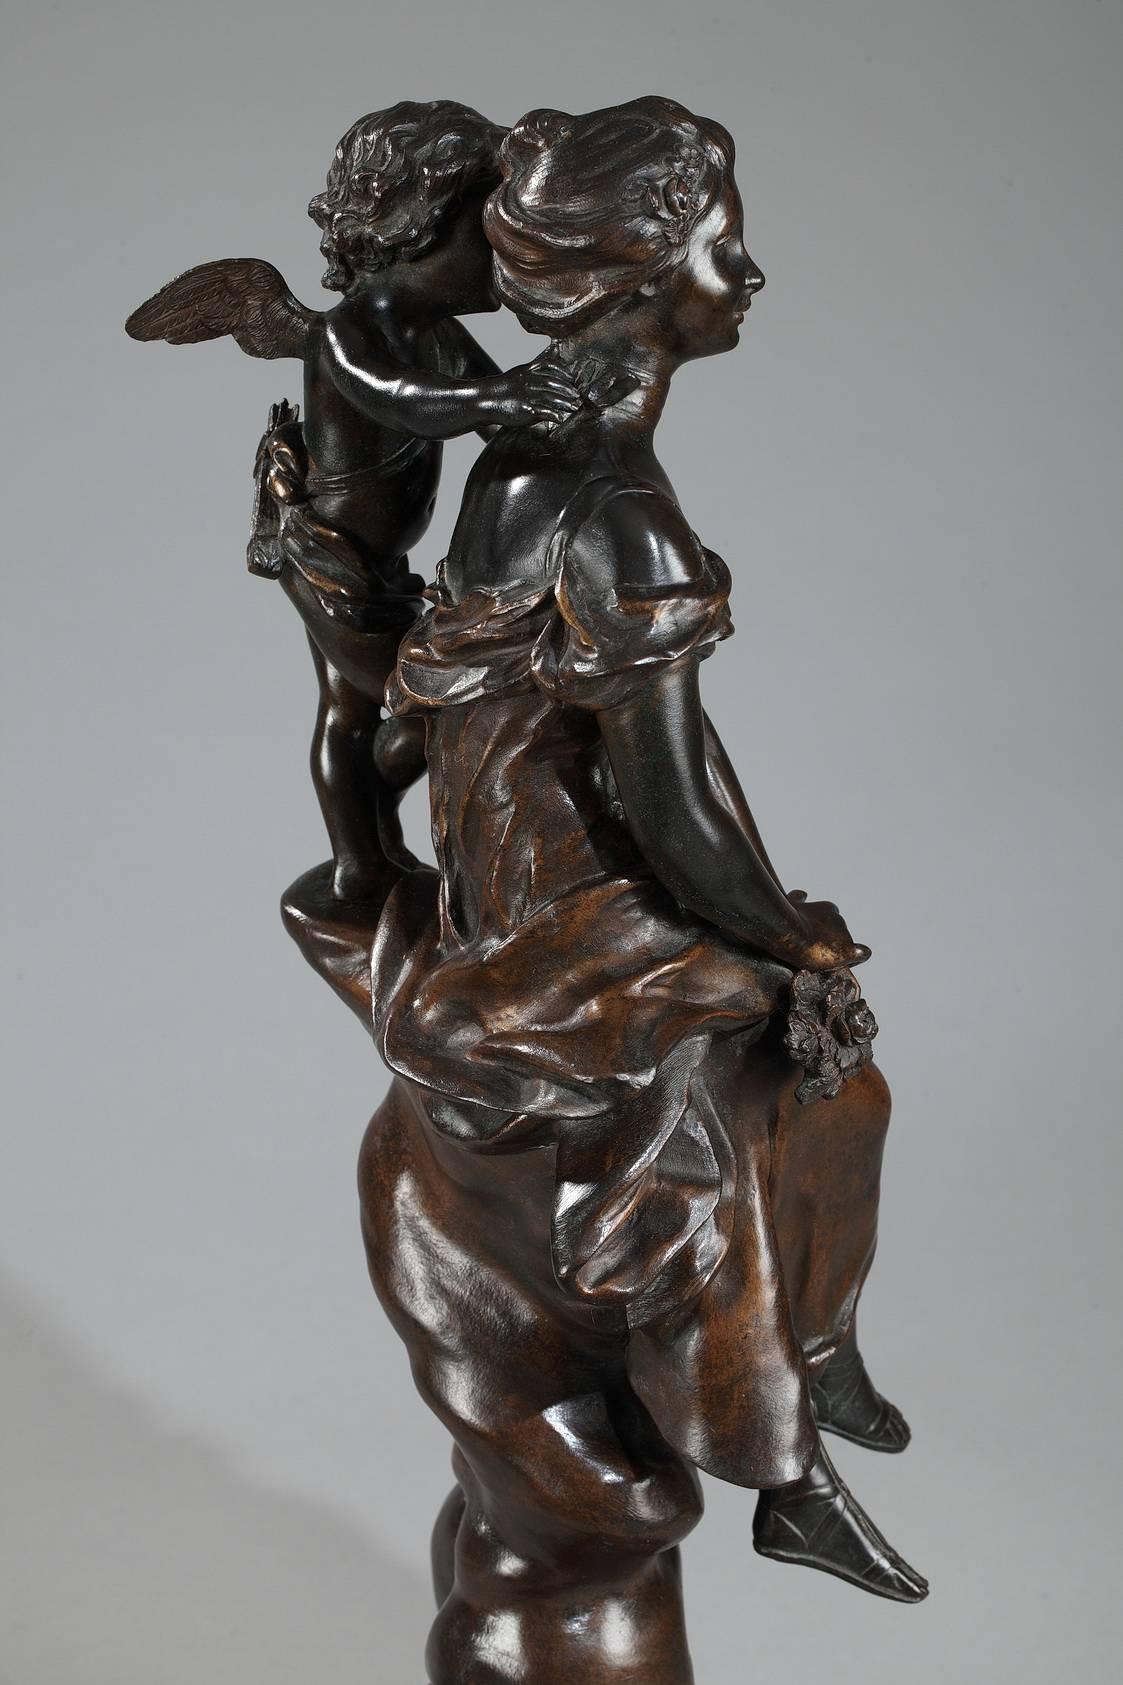 Bronze sculpture with dark brown patination, featuring a dreamy young woman in a flowing dress holding a small bouquet of flowers. Behind her, a winged cupid with his quiver whispers tender words in her ear. They are resting on a twisting tree trunk